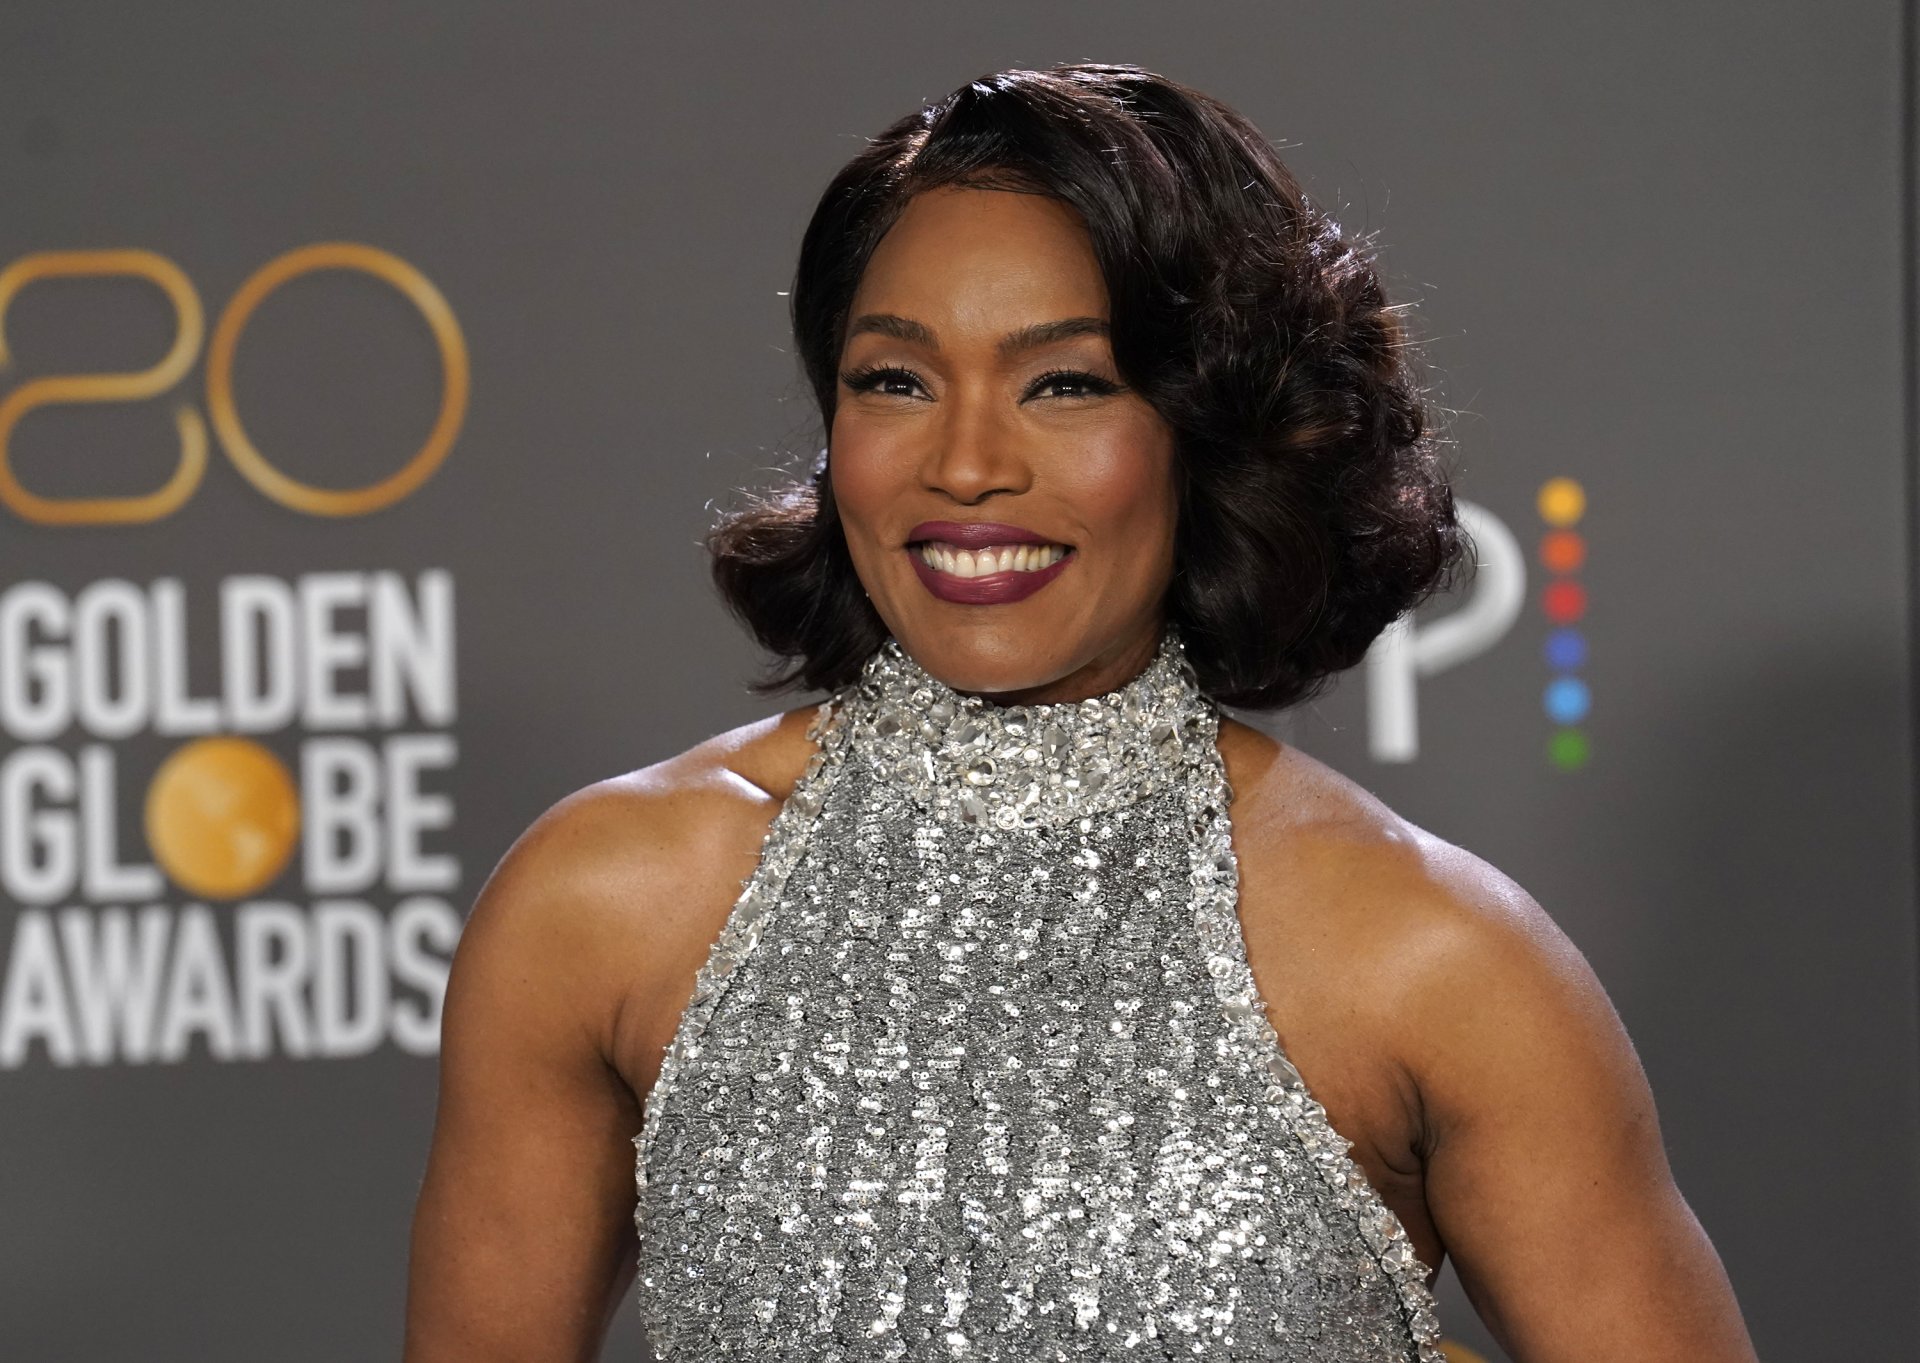 Angela Bassett with a Golden Globe Award for her supporting role in Black Panther: Wakanda Forever